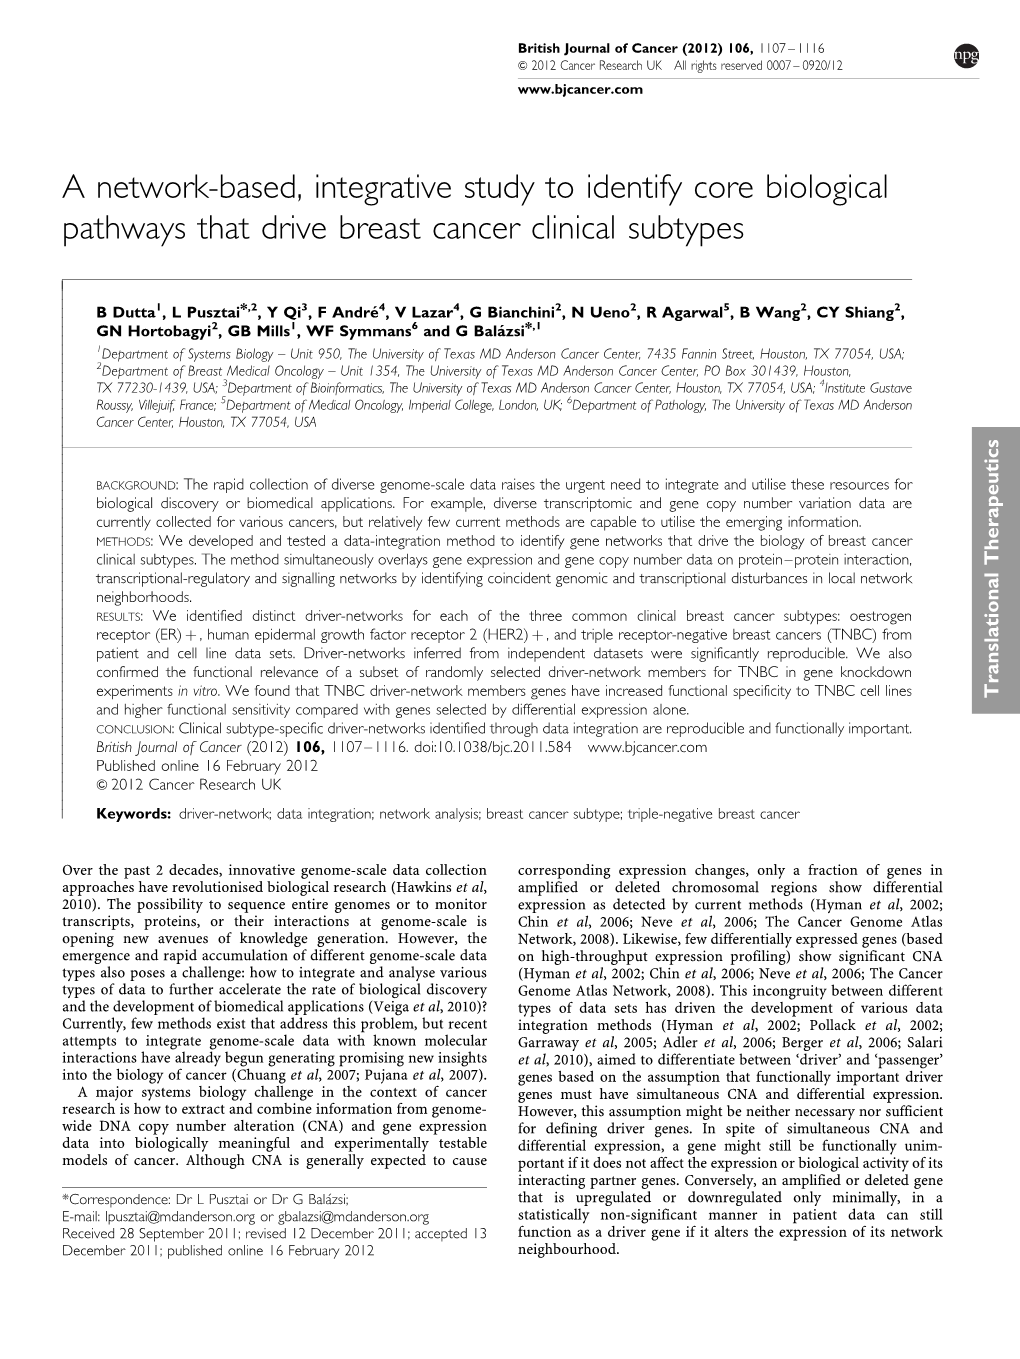 A Network-Based, Integrative Study to Identify Core Biological Pathways That Drive Breast Cancer Clinical Subtypes